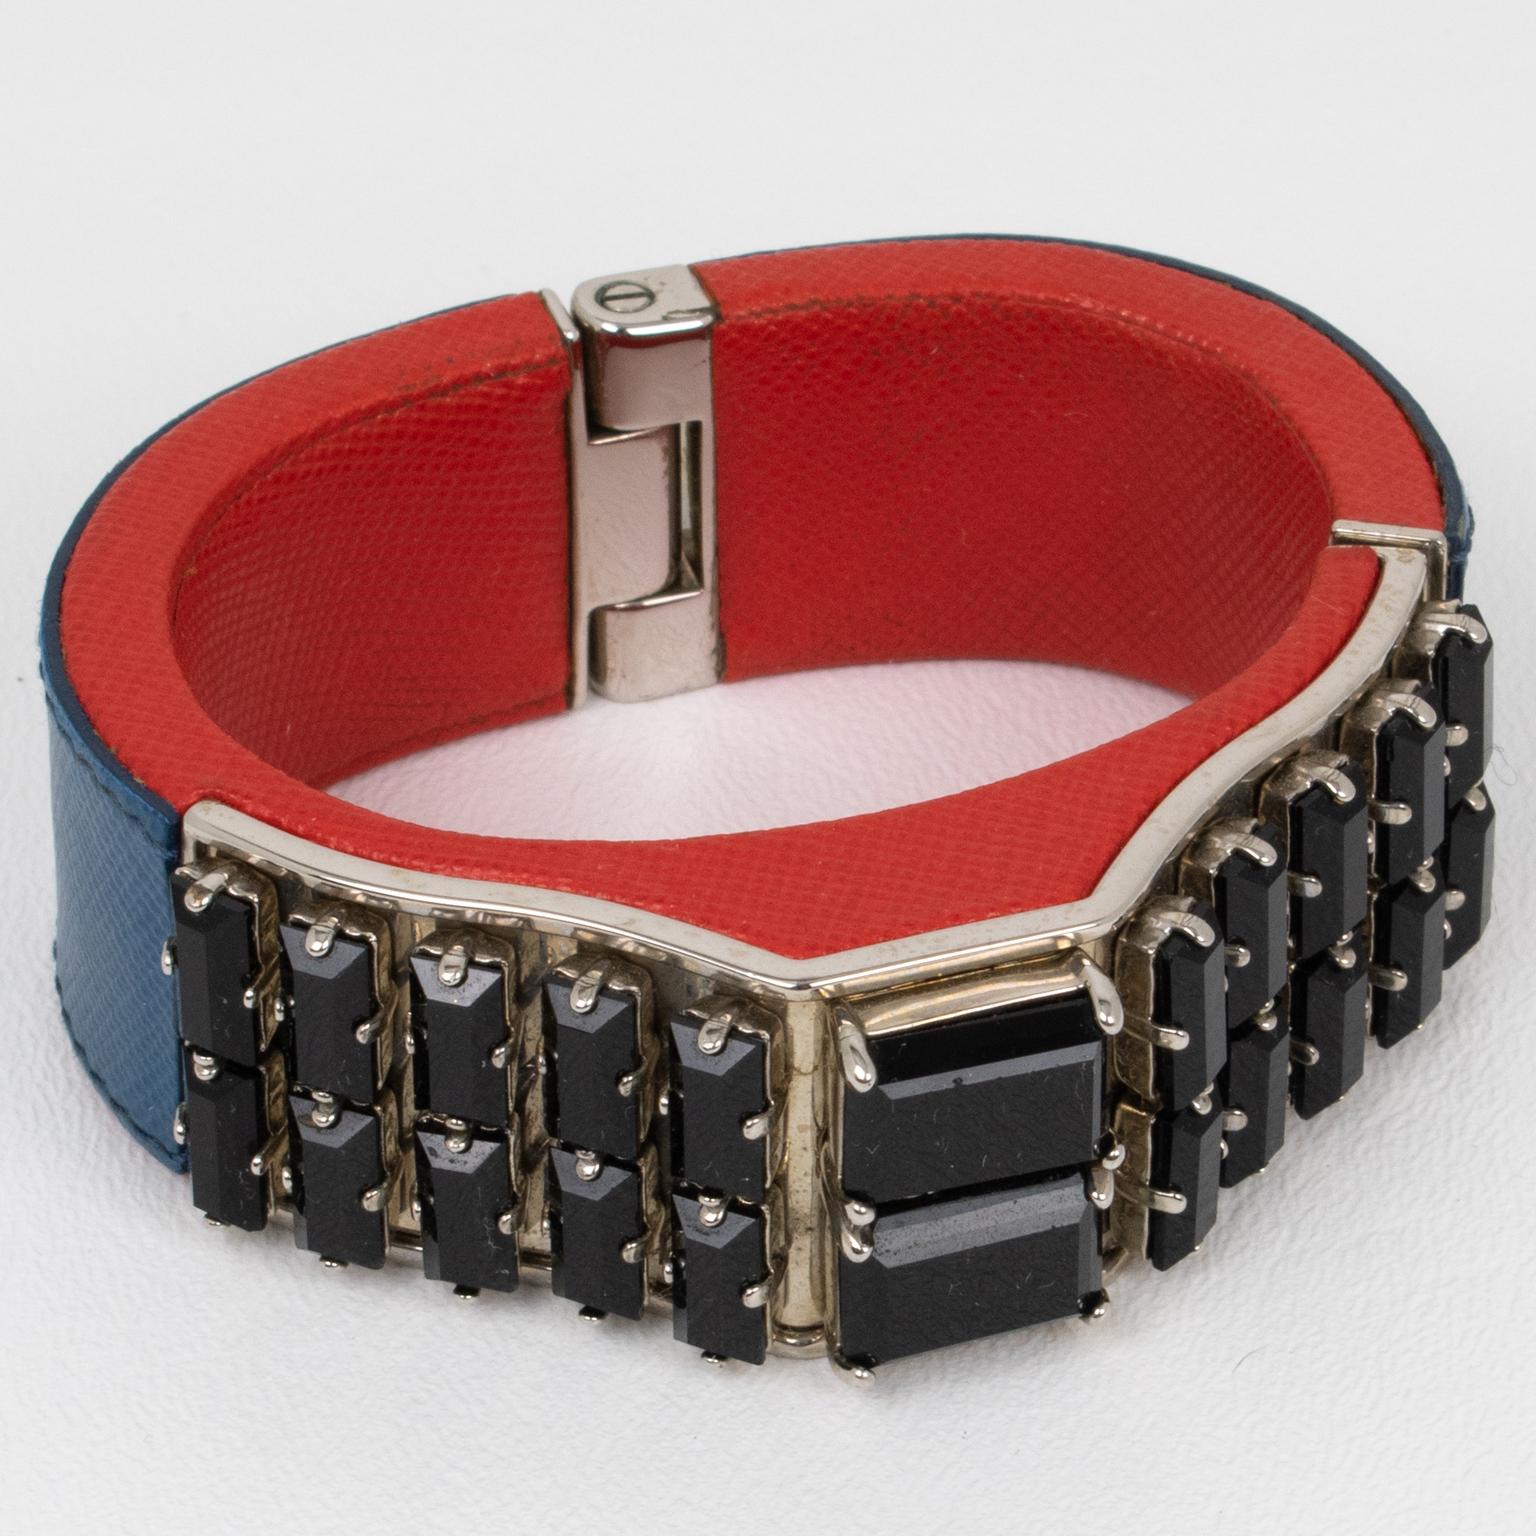 Prada Spring 2014 Red, Blue Saffiano Leather Clamper Bracelet with Black Crystal In Excellent Condition For Sale In Atlanta, GA